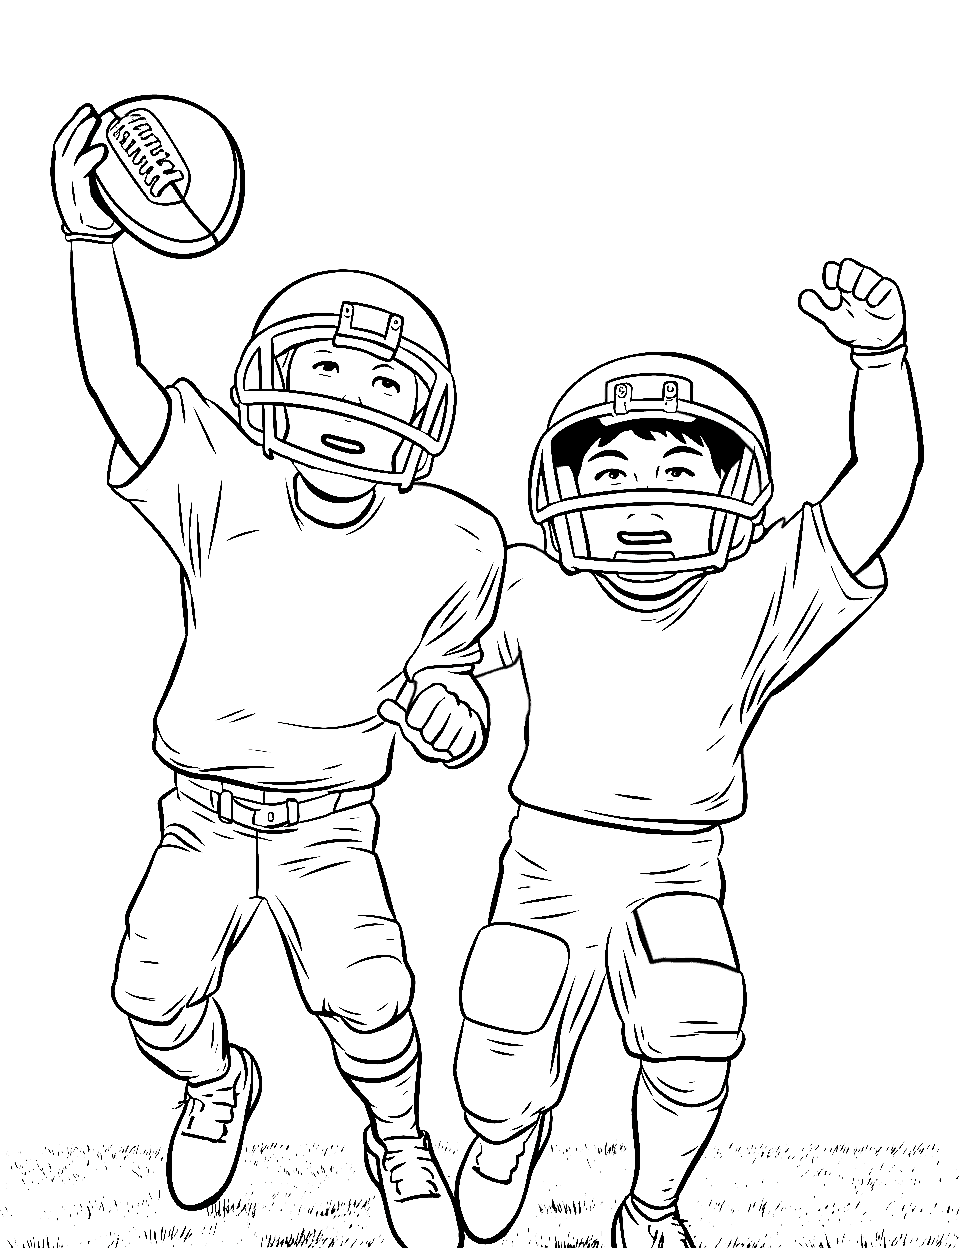 Successful Two-Point Conversion Coloring Page - Players celebrating a successful two-point conversion.